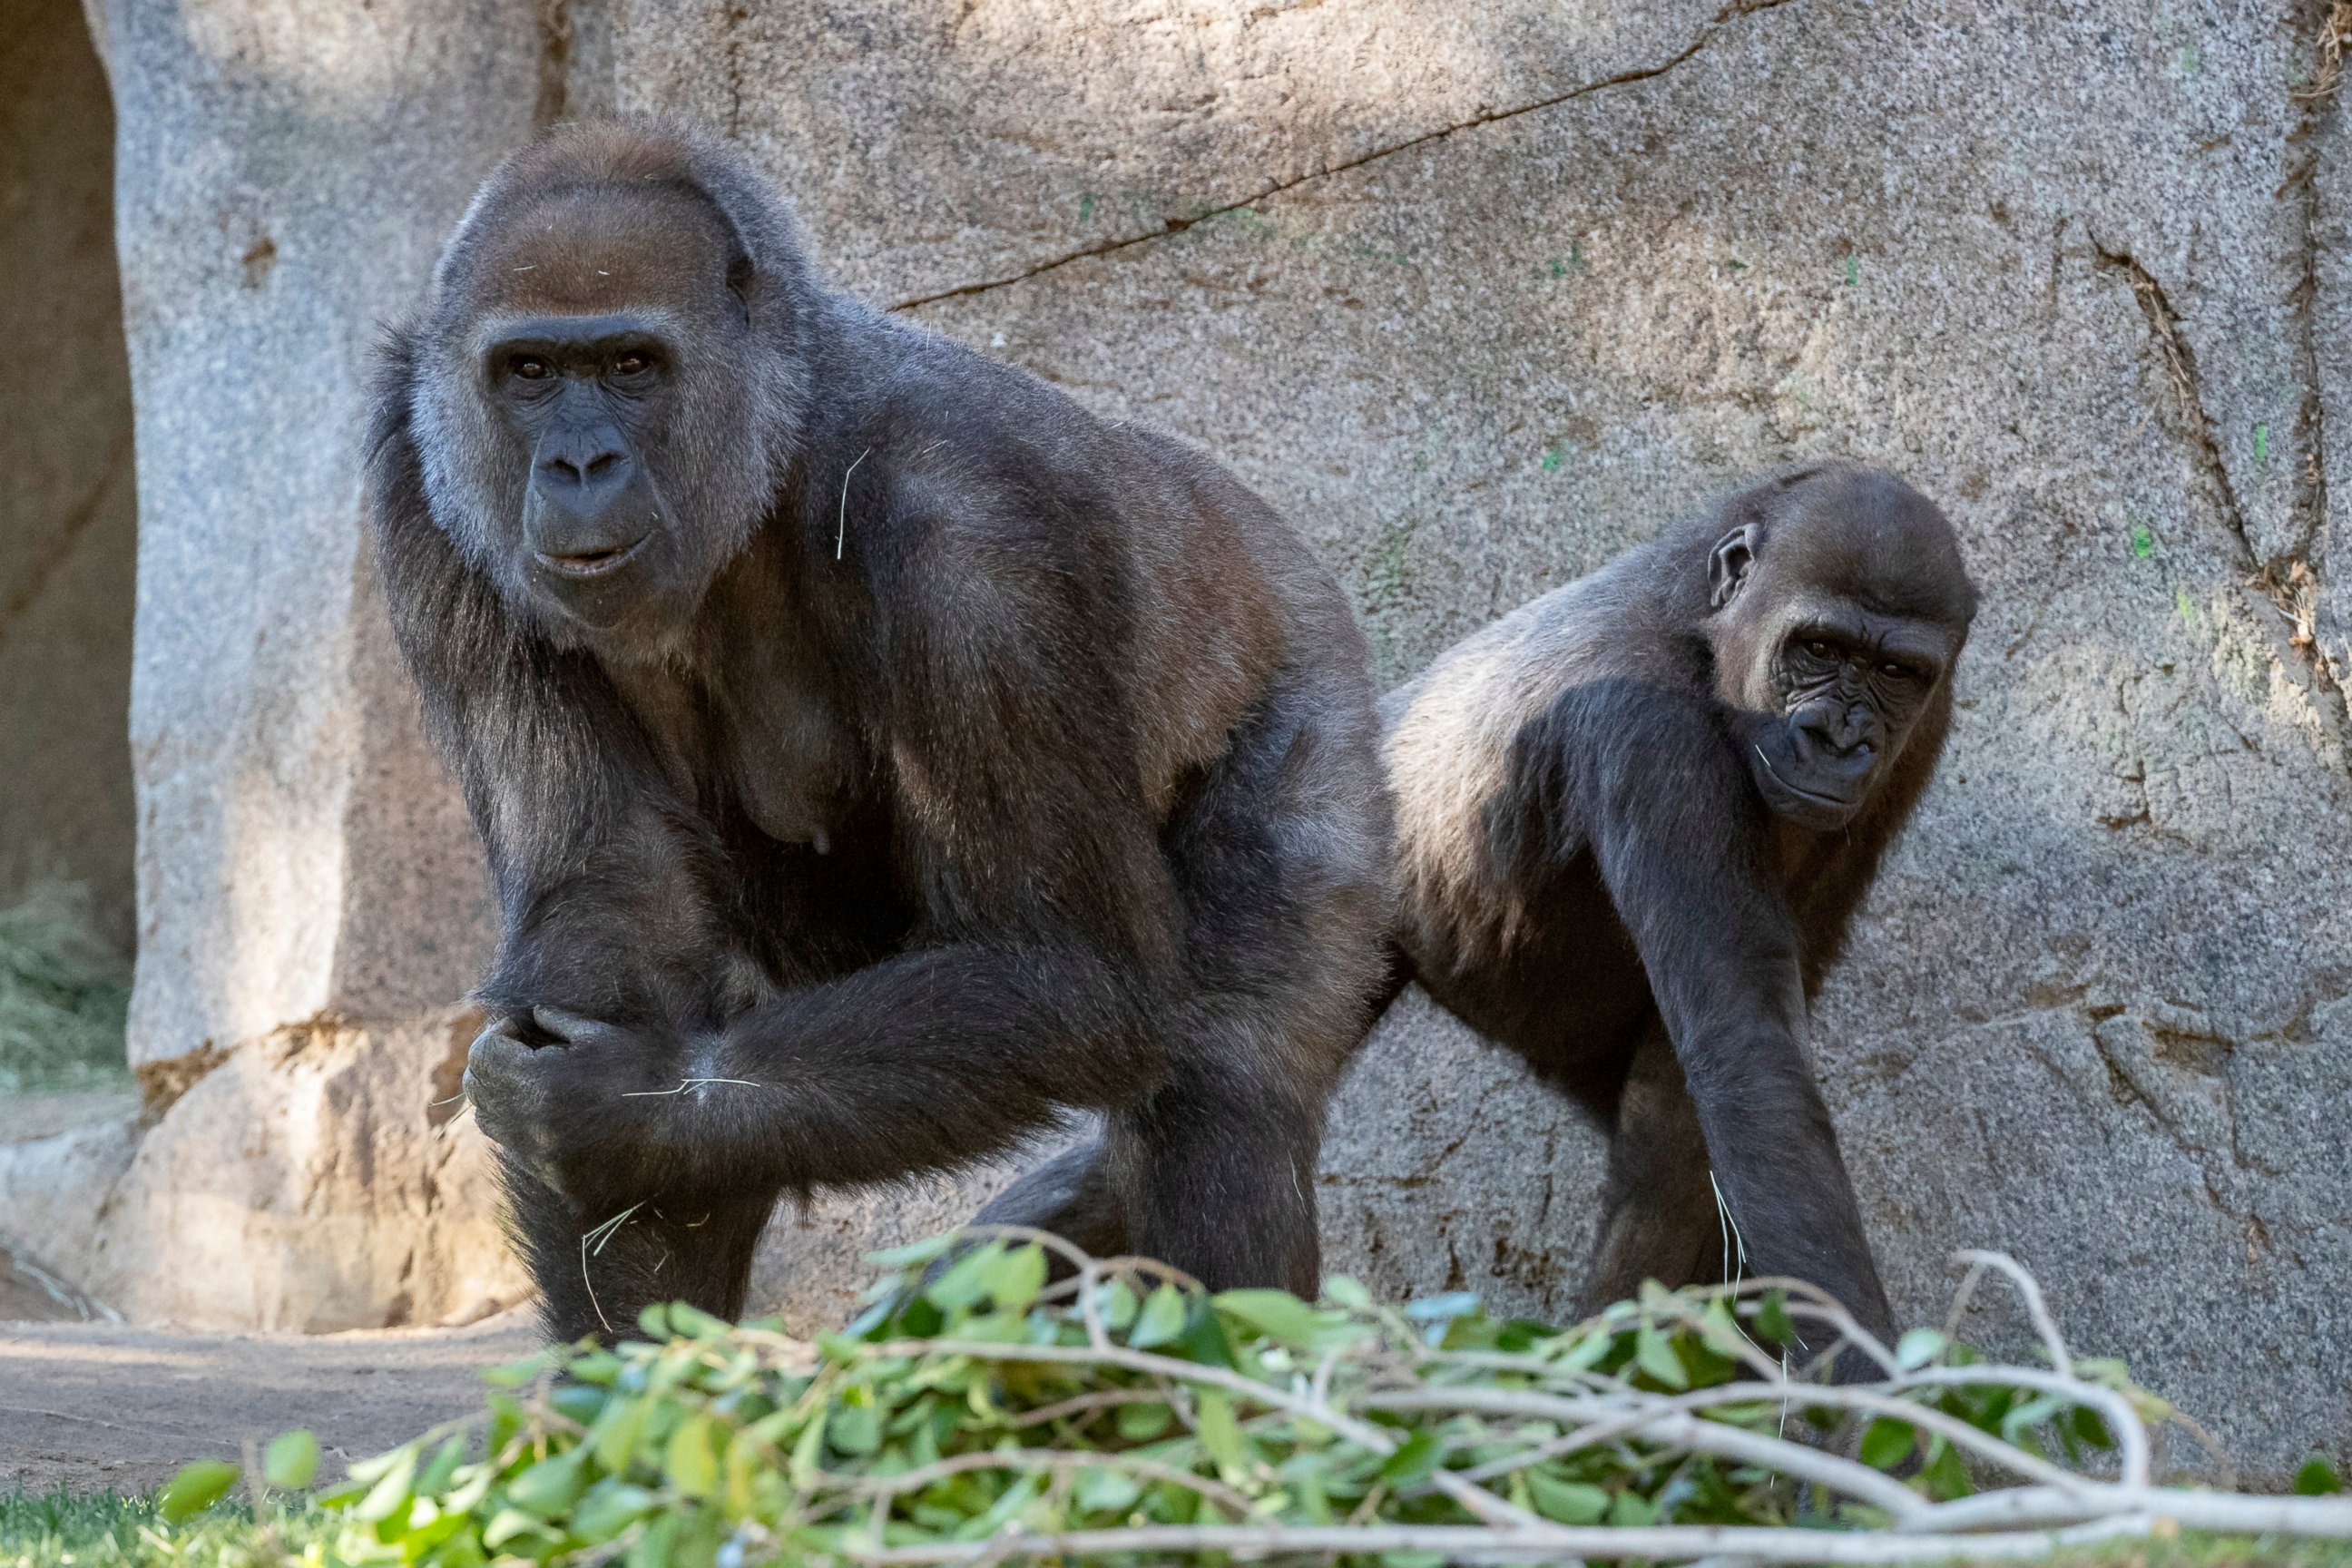 PHOTO: In this January 2021 photo provided by the San Diego Zoo, Leslie, a silverback gorilla, left, and a gorilla named Imani are seen in their enclosure at the San Diego Zoo Safari Park in Escondido, Calif.